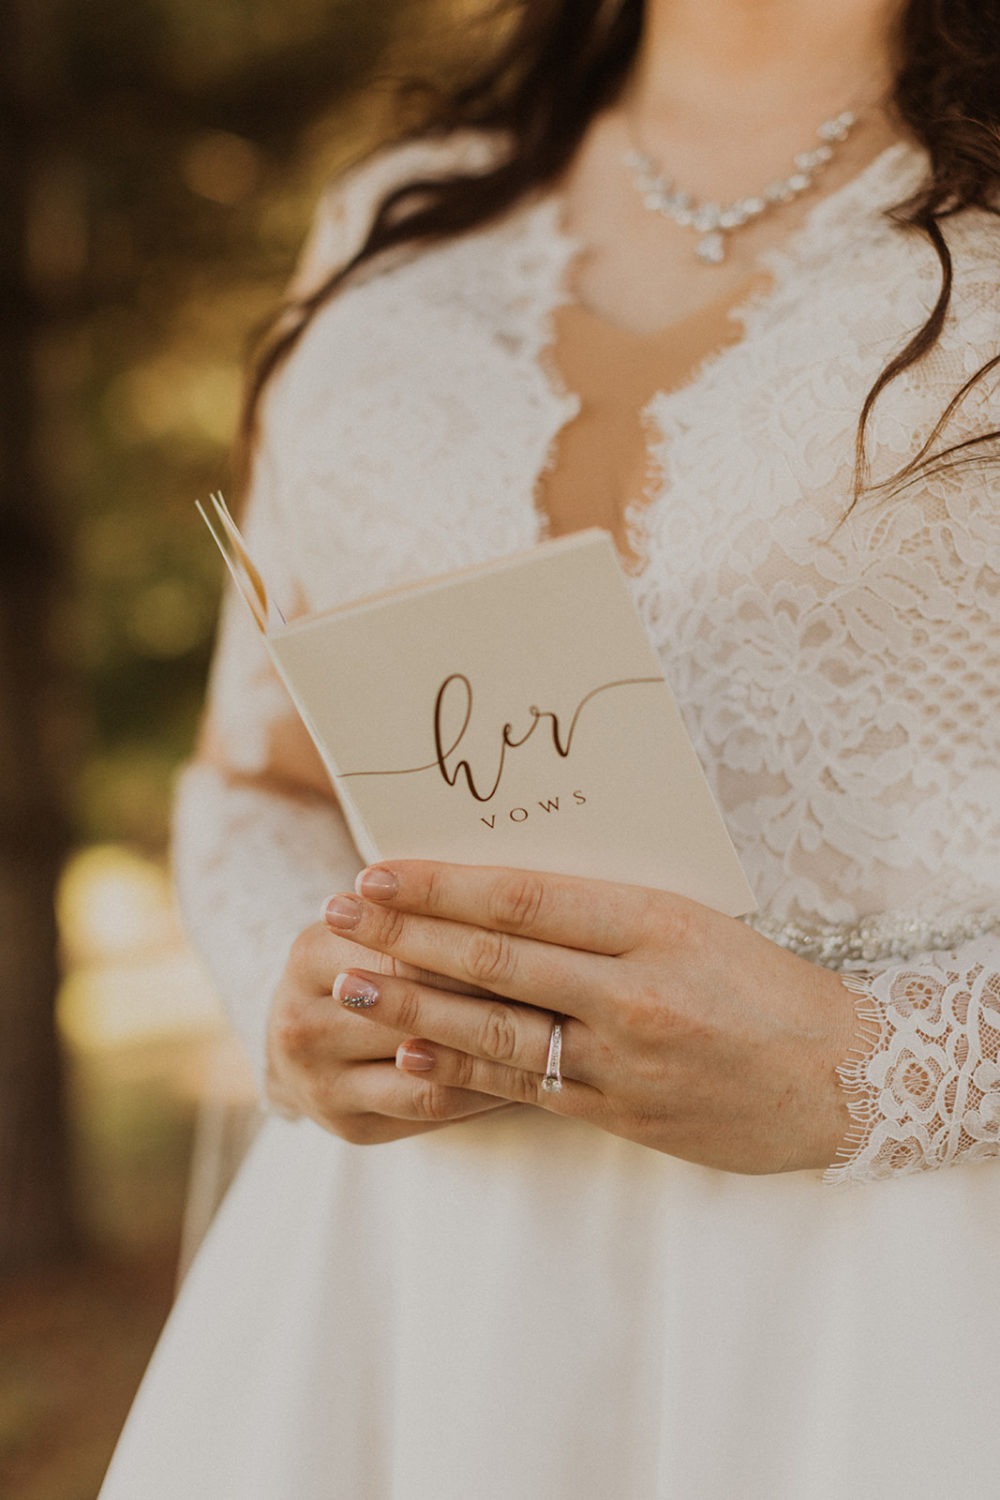 Groom holds a her vows book